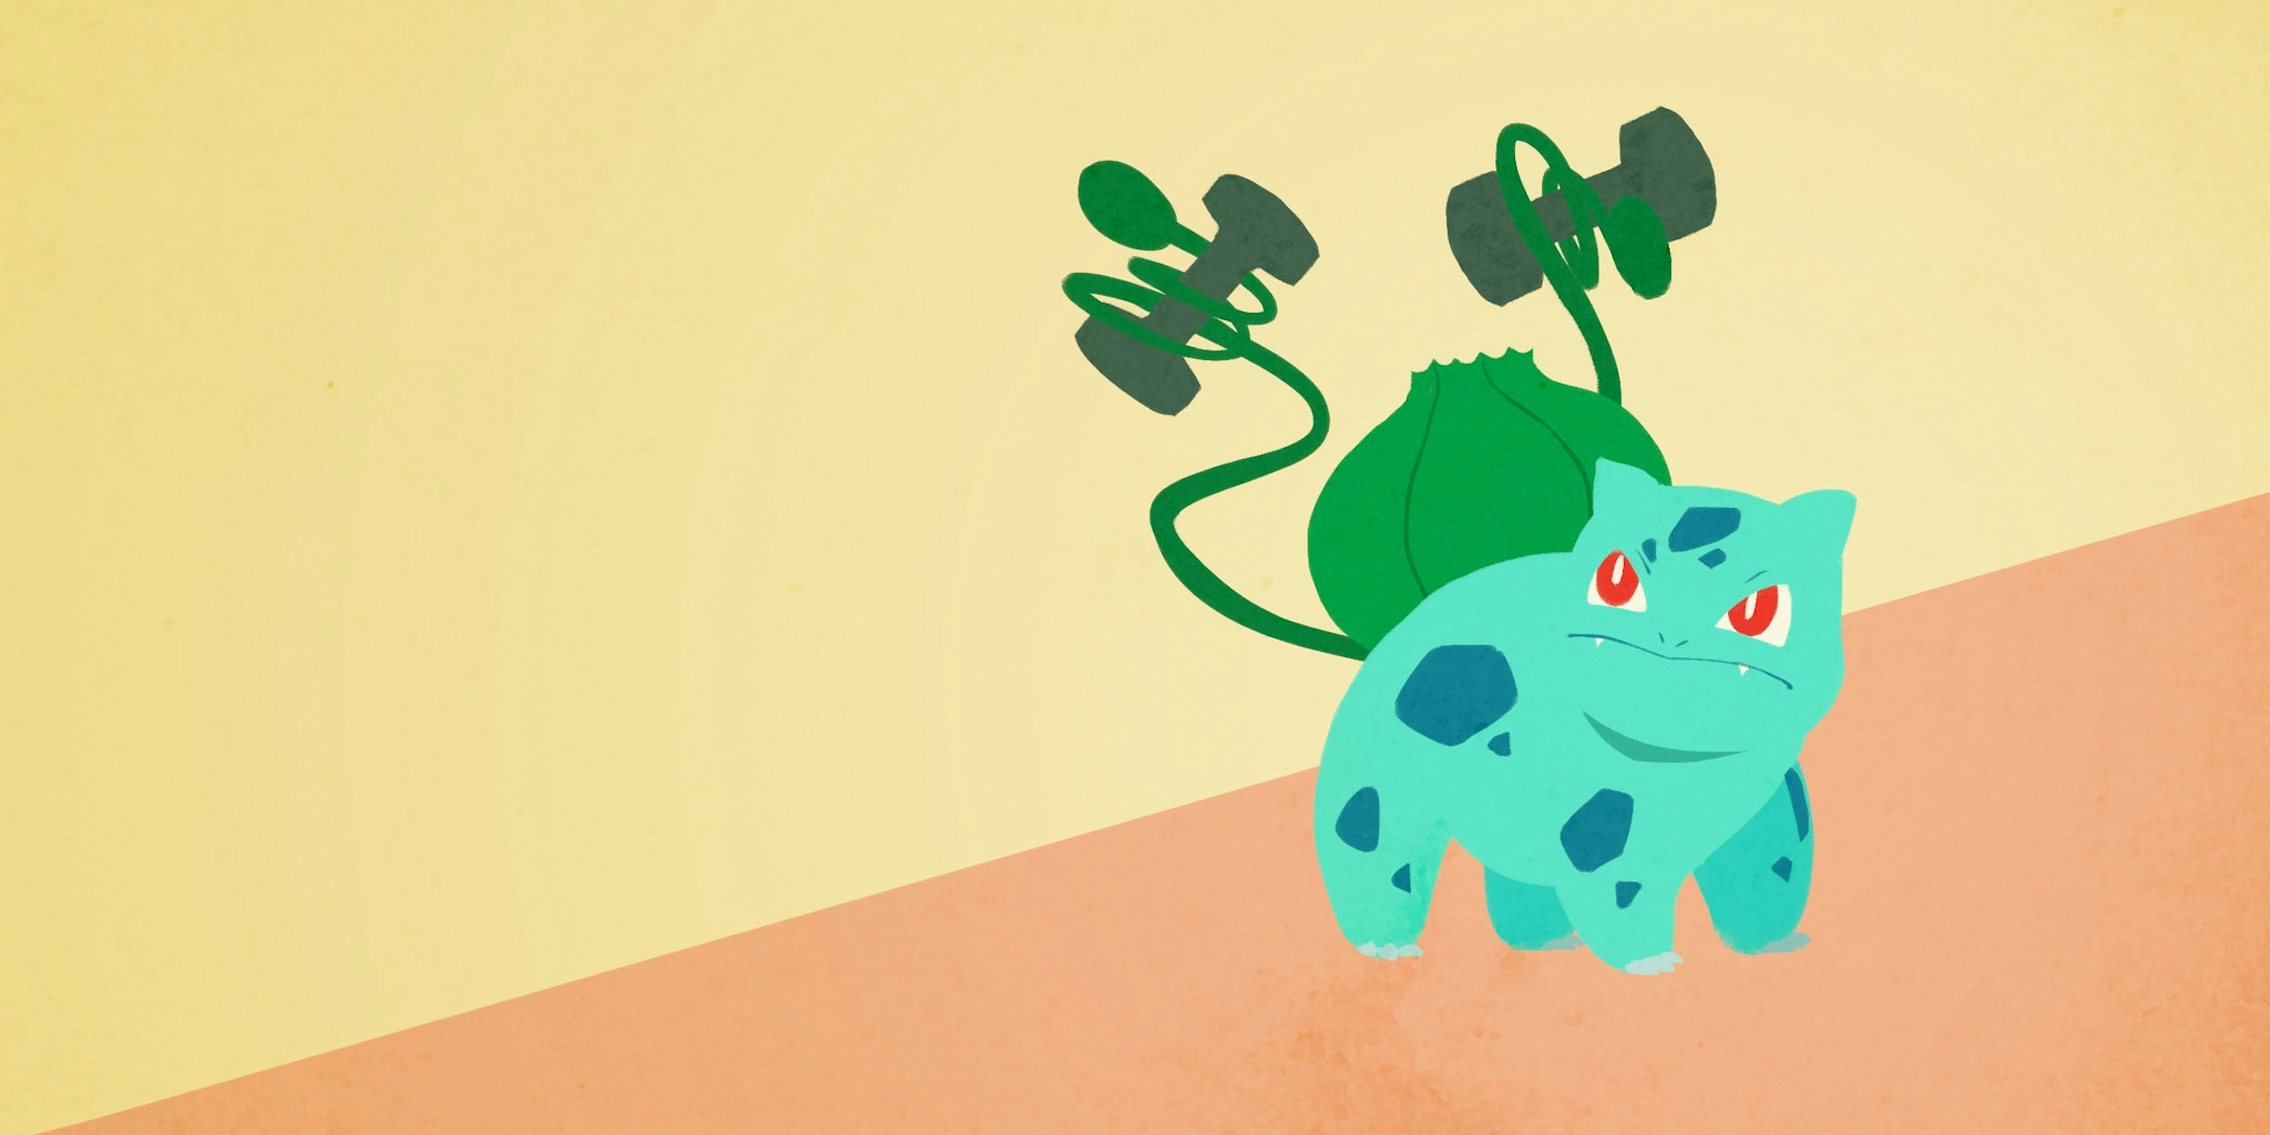 what level does bulbasaur evolve to｜TikTok Search